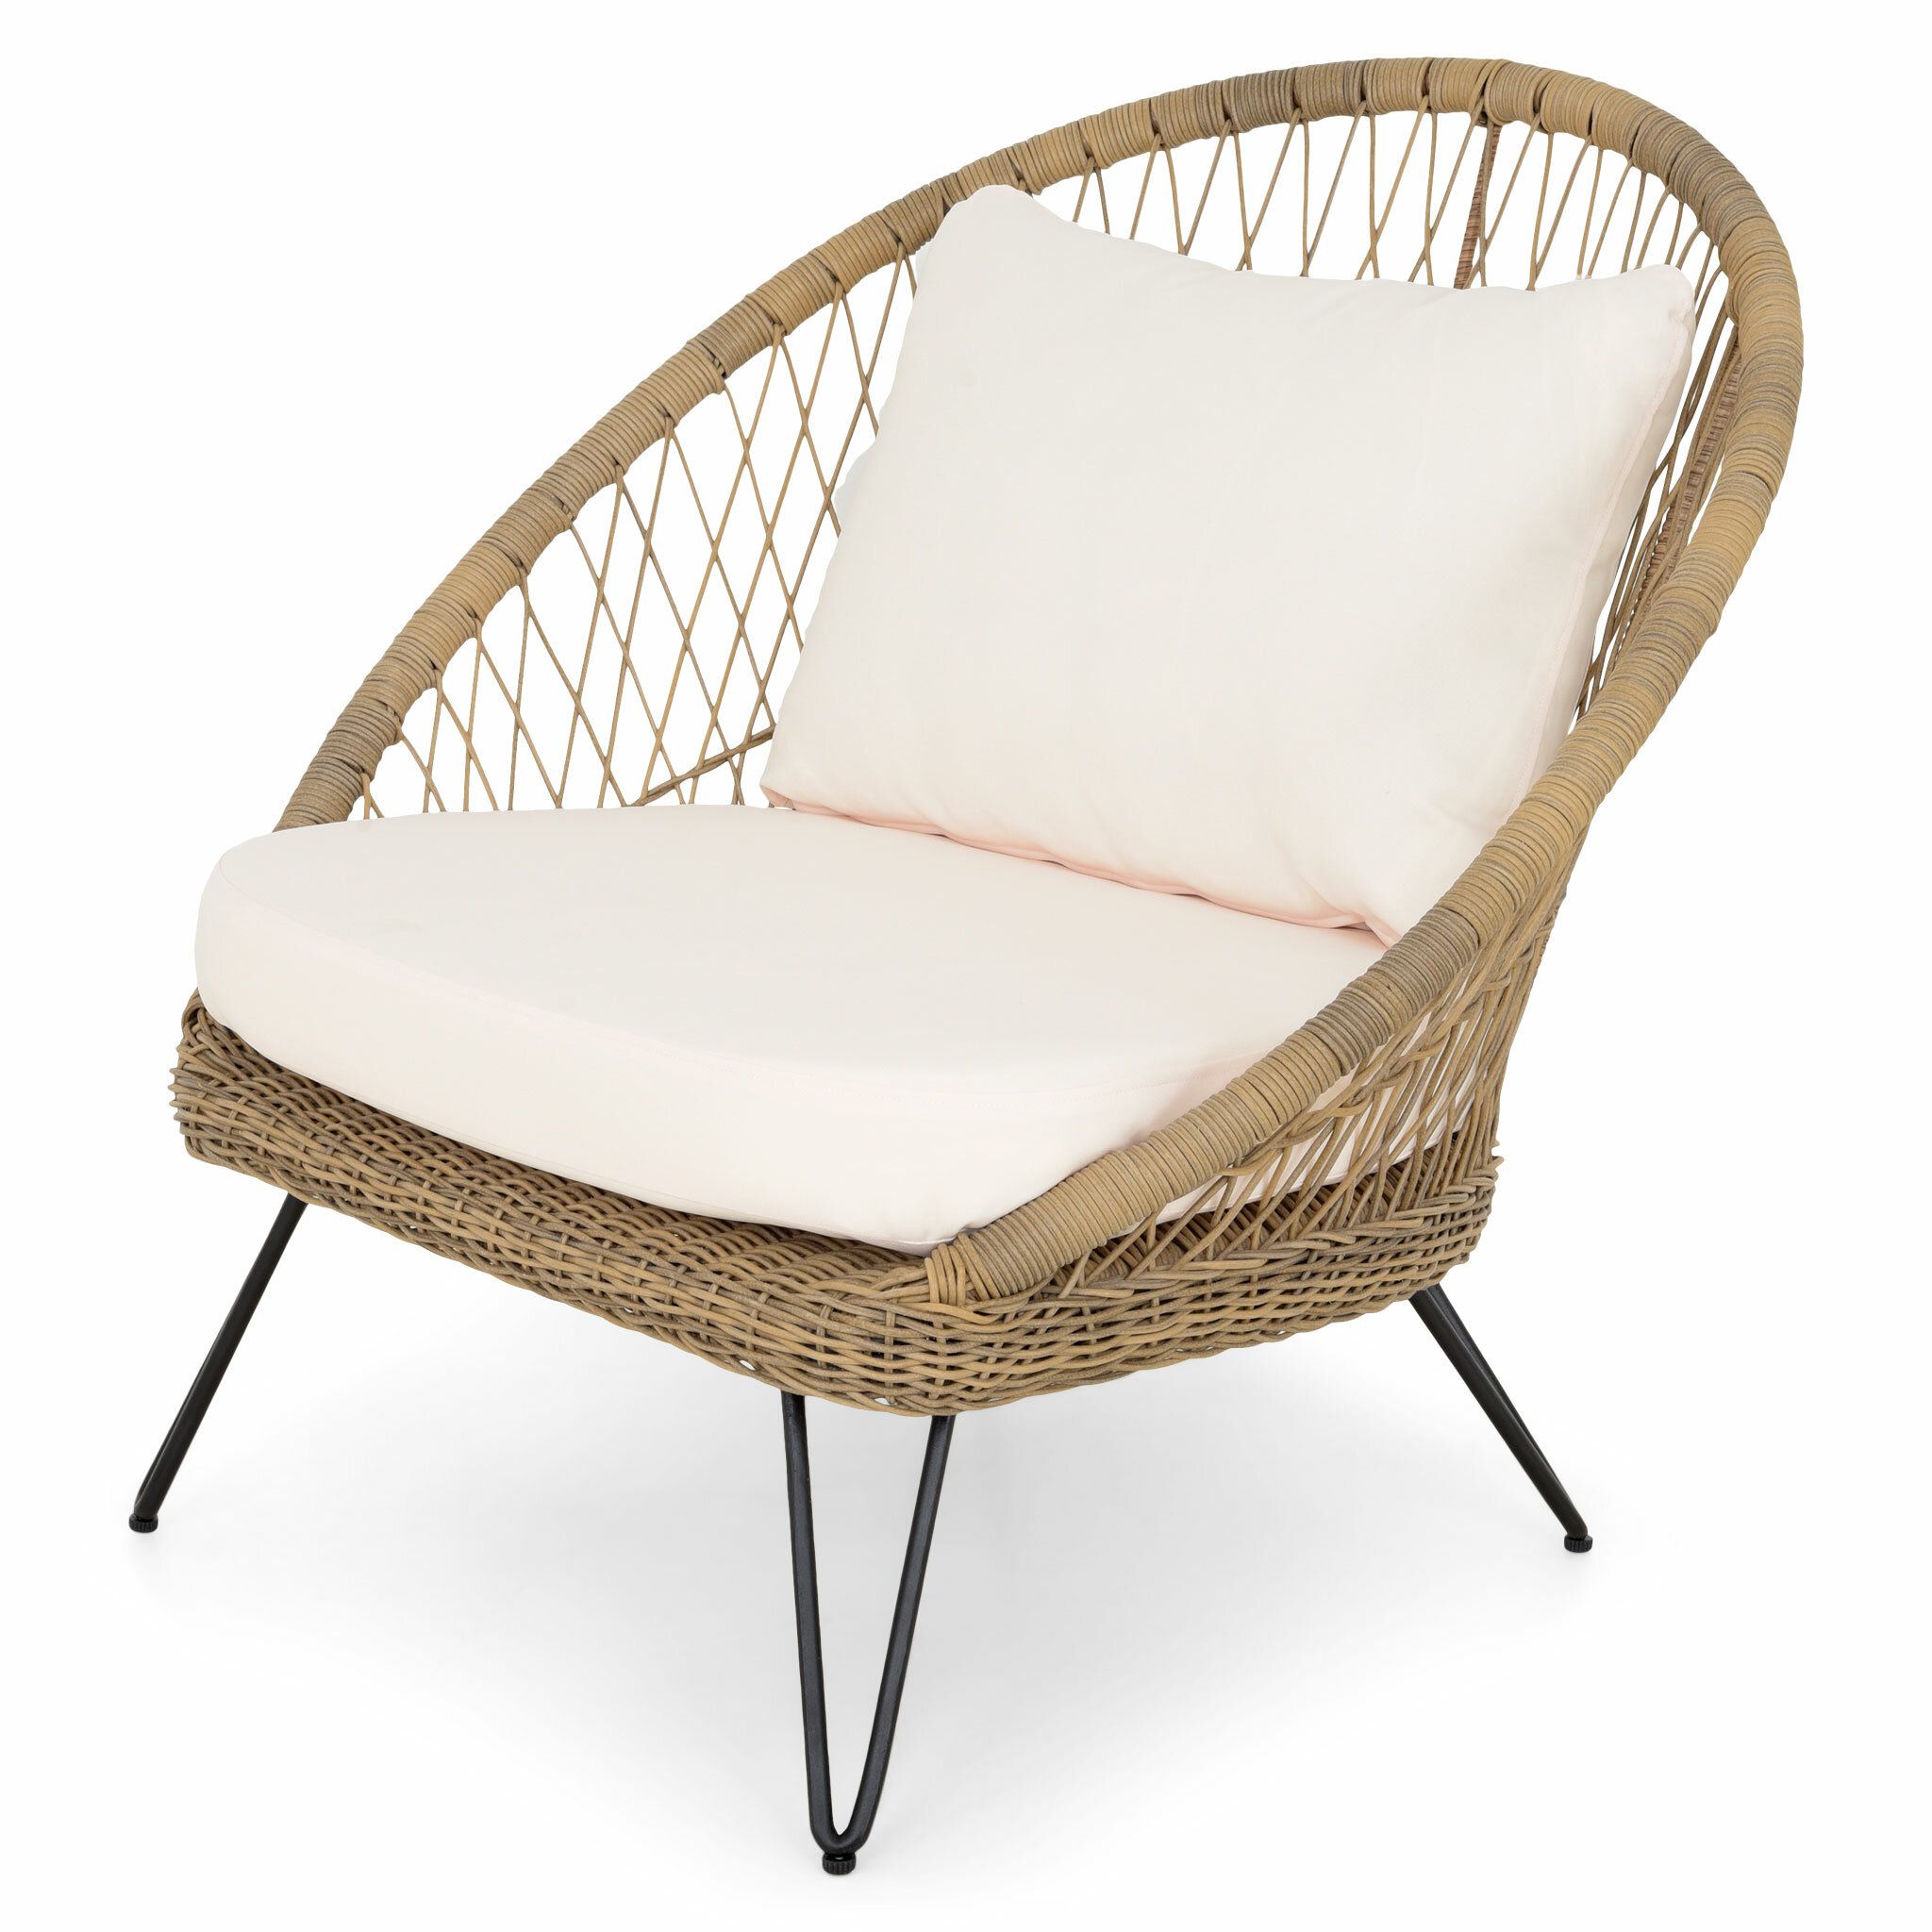 Featured image of post Papasan Chair Uk - Looking for something more closely tailored to contemporary trends?